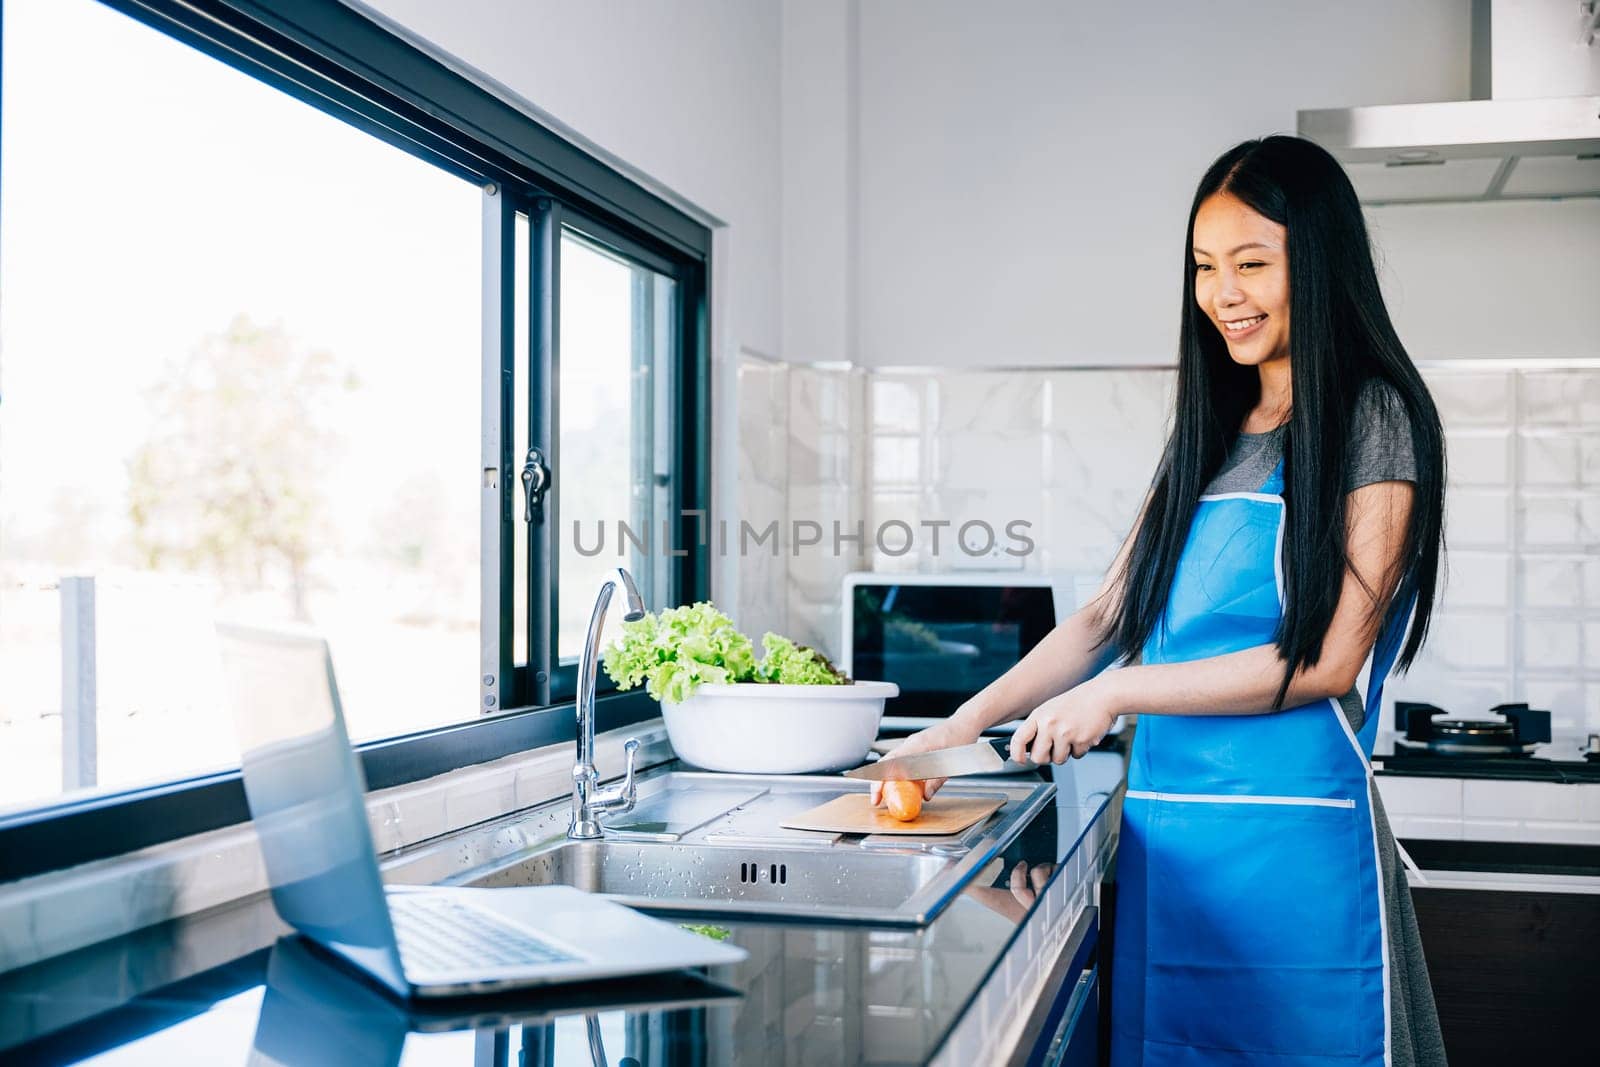 A woman stands in the kitchen enjoying cooking while searching for tutorials on her laptop by Sorapop